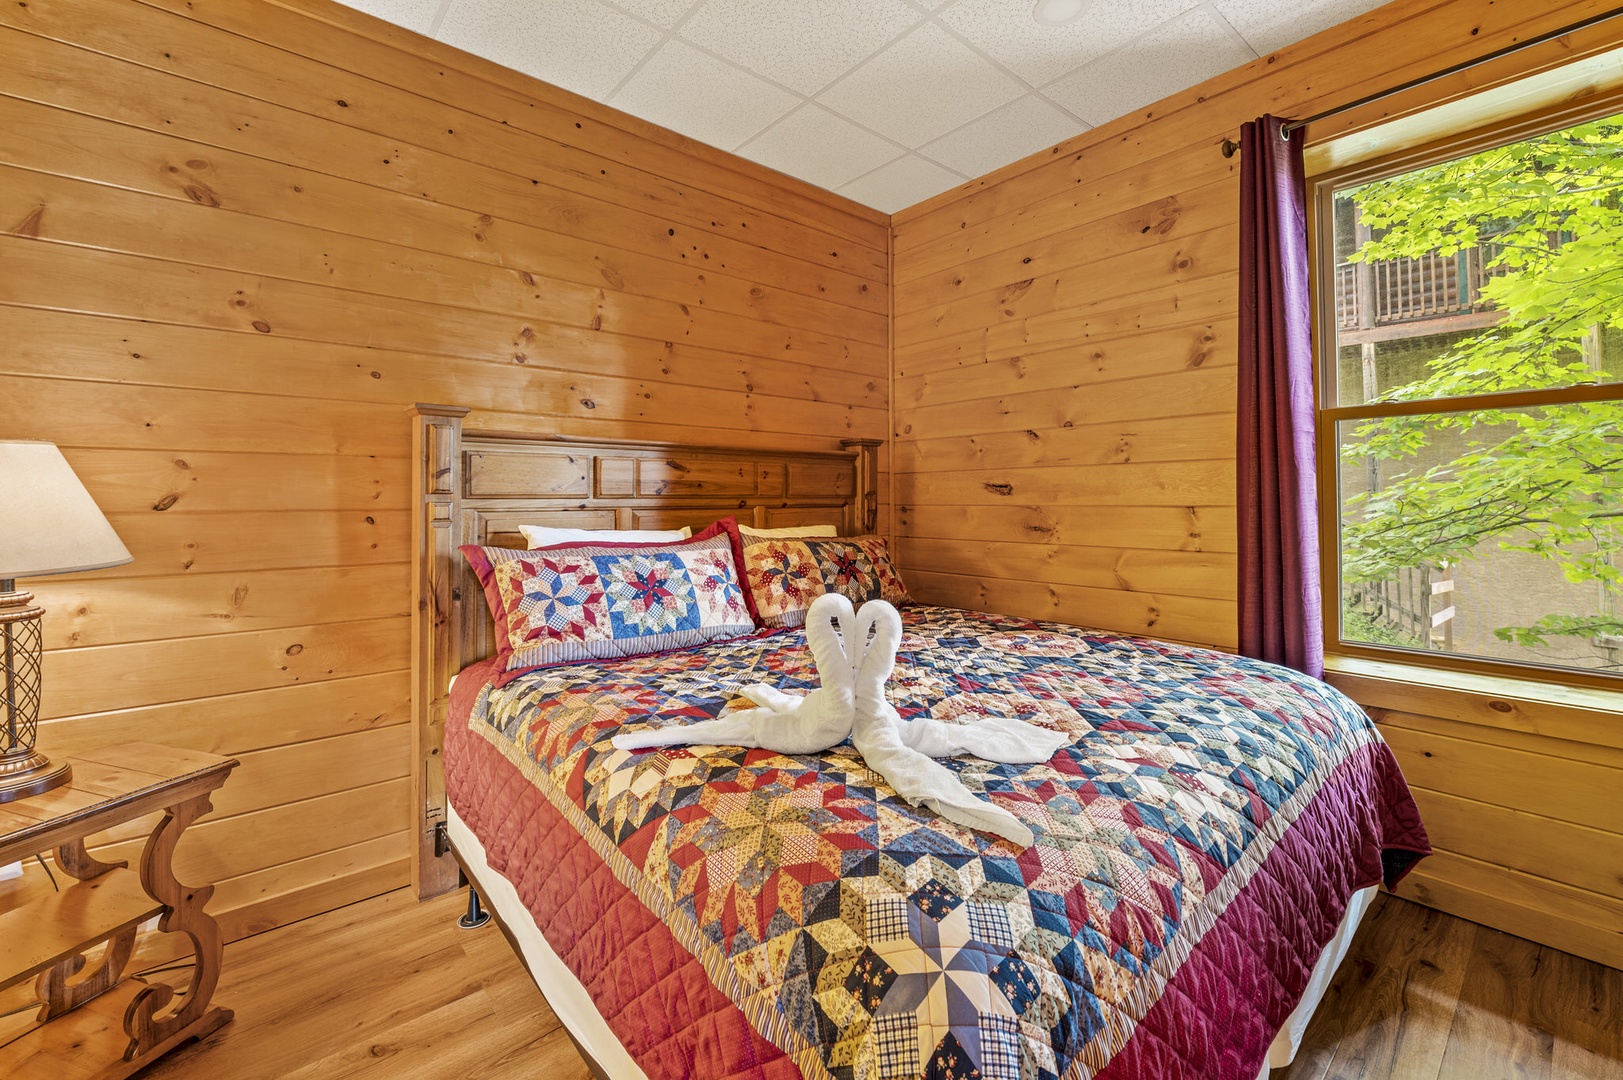 Bedroom With Quilt at Bear Sunrise